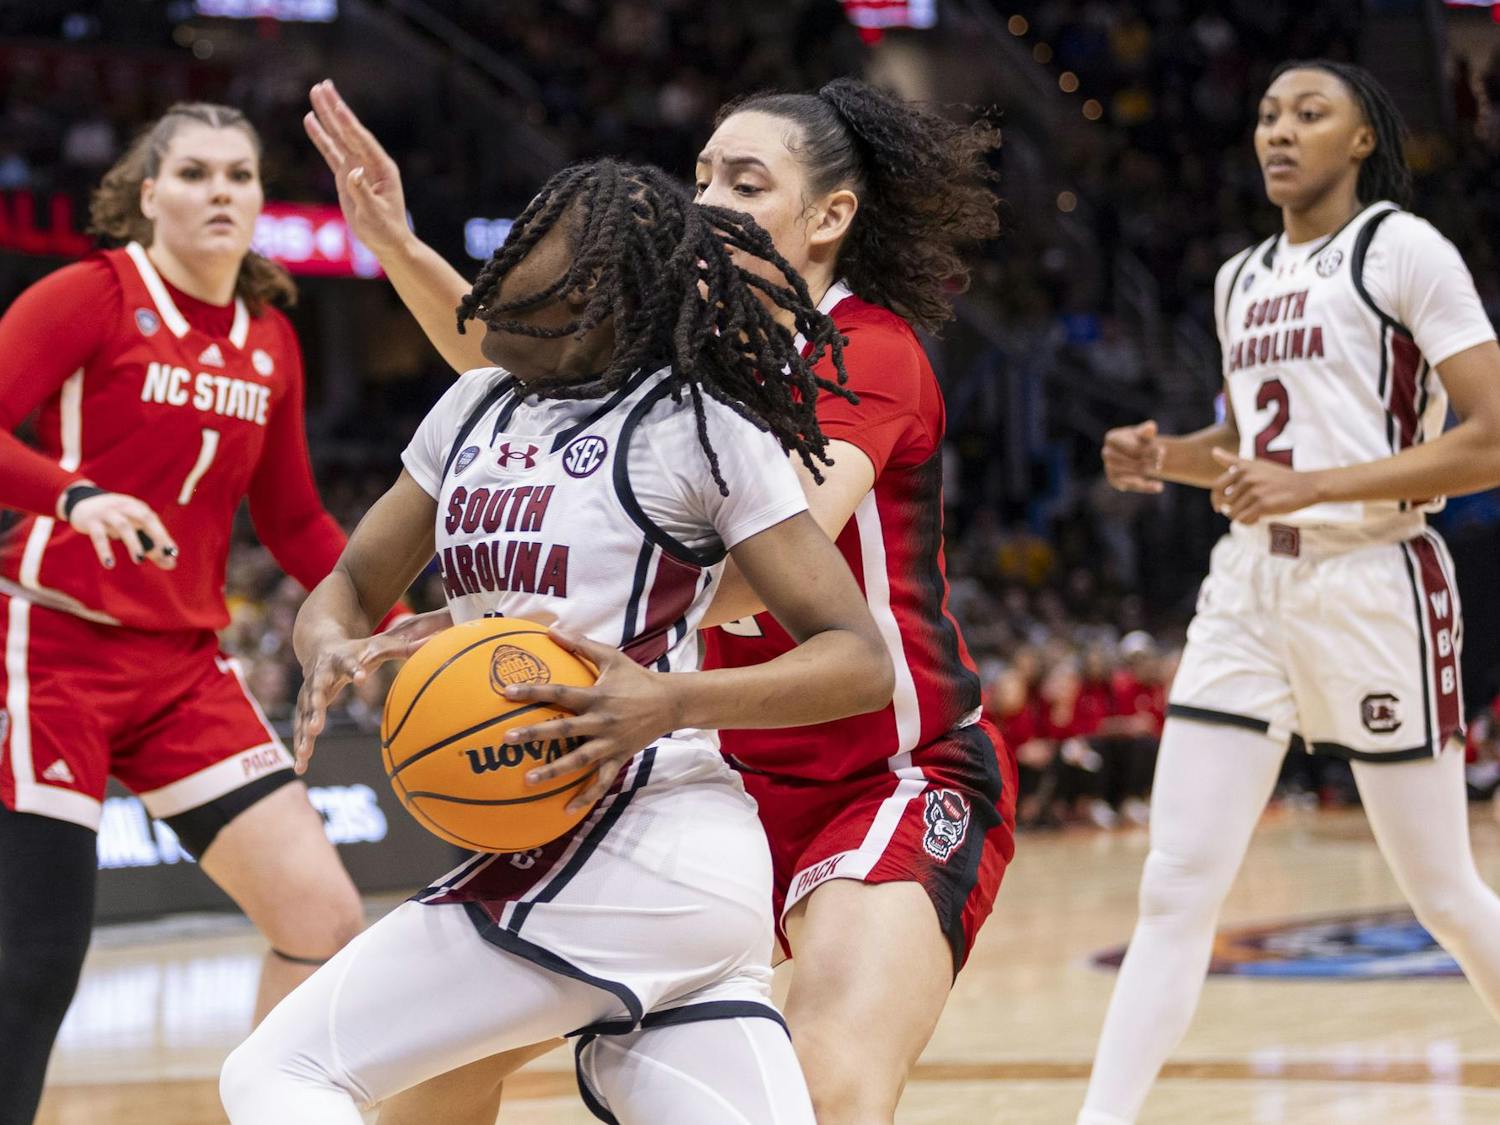 Freshman guard MiLaysia Fulwiley drives to the basket as the Gamecocks defeat the Wolf Pack 78-59. Fulwiley scored 7 points for the Gamecocks in its NCAA semifinal game.